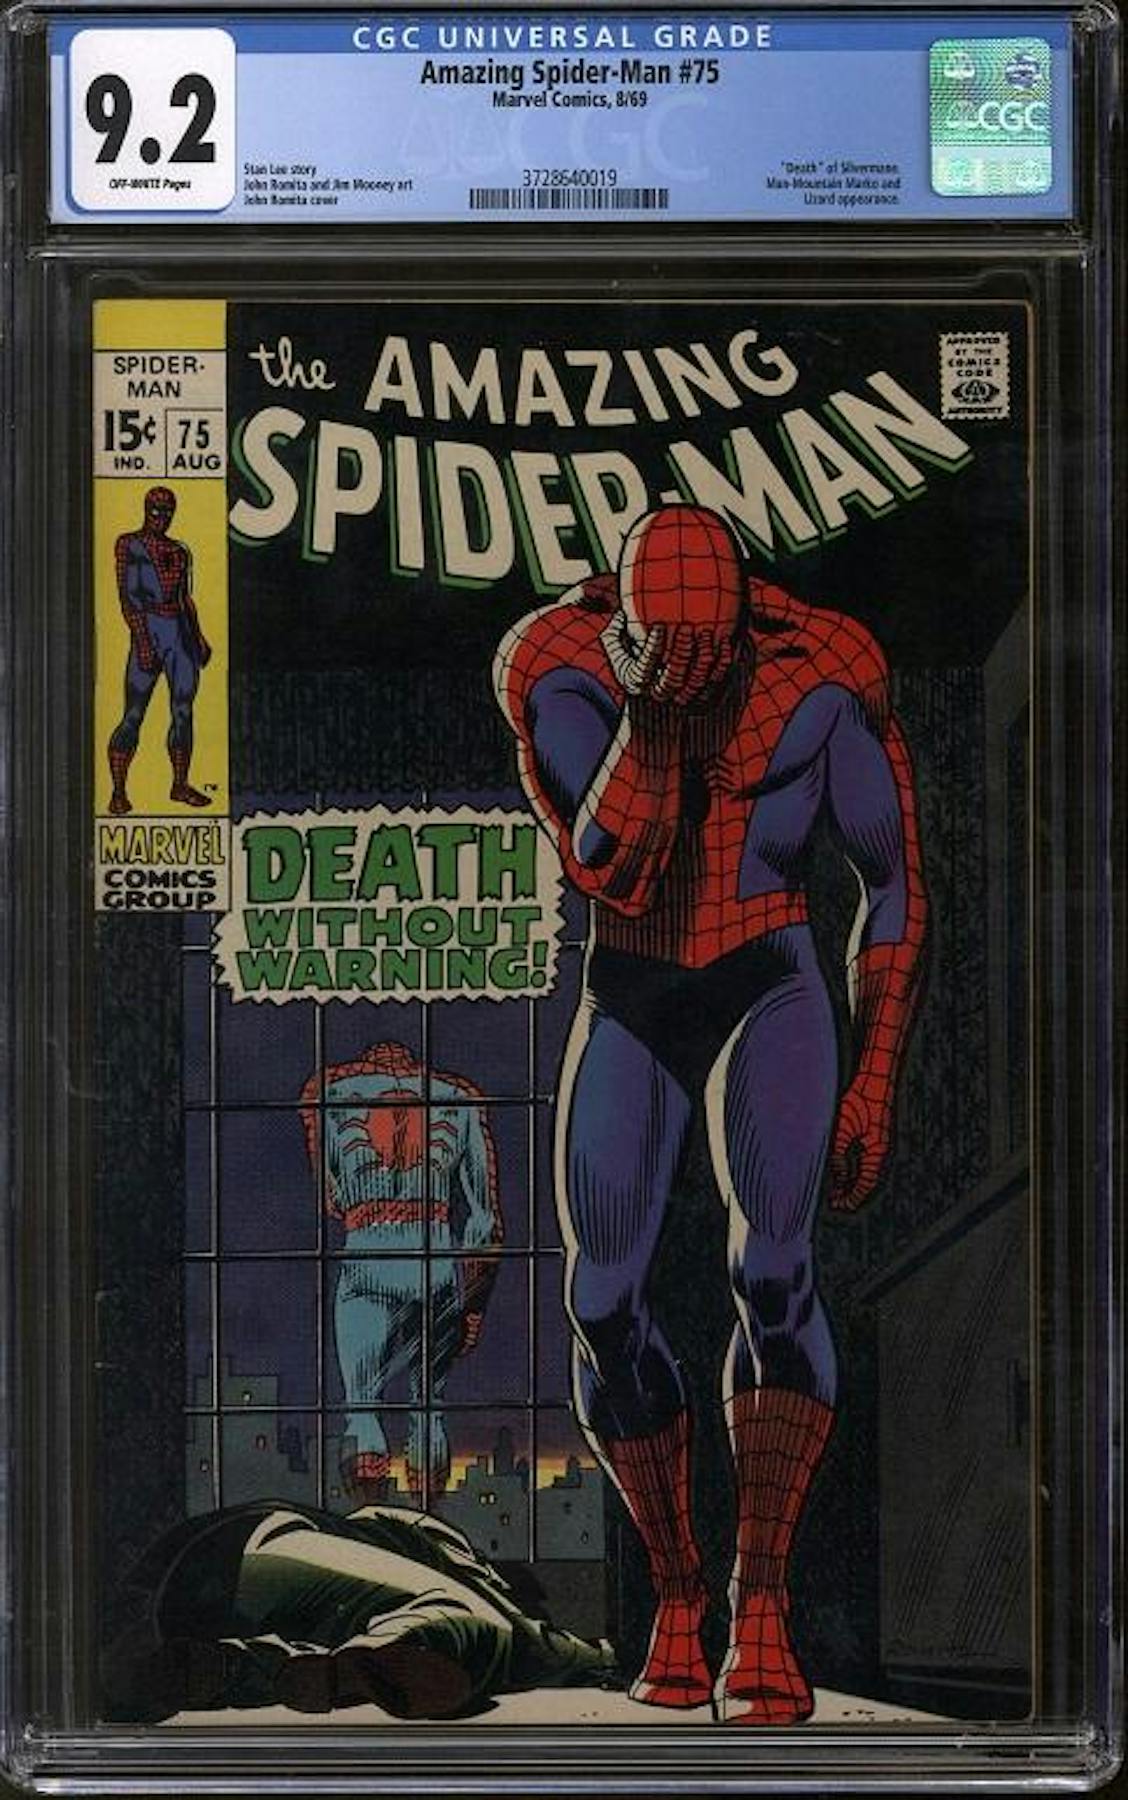 The Amazing Spider-Man #75 - Death Without Warning! - SOLD 